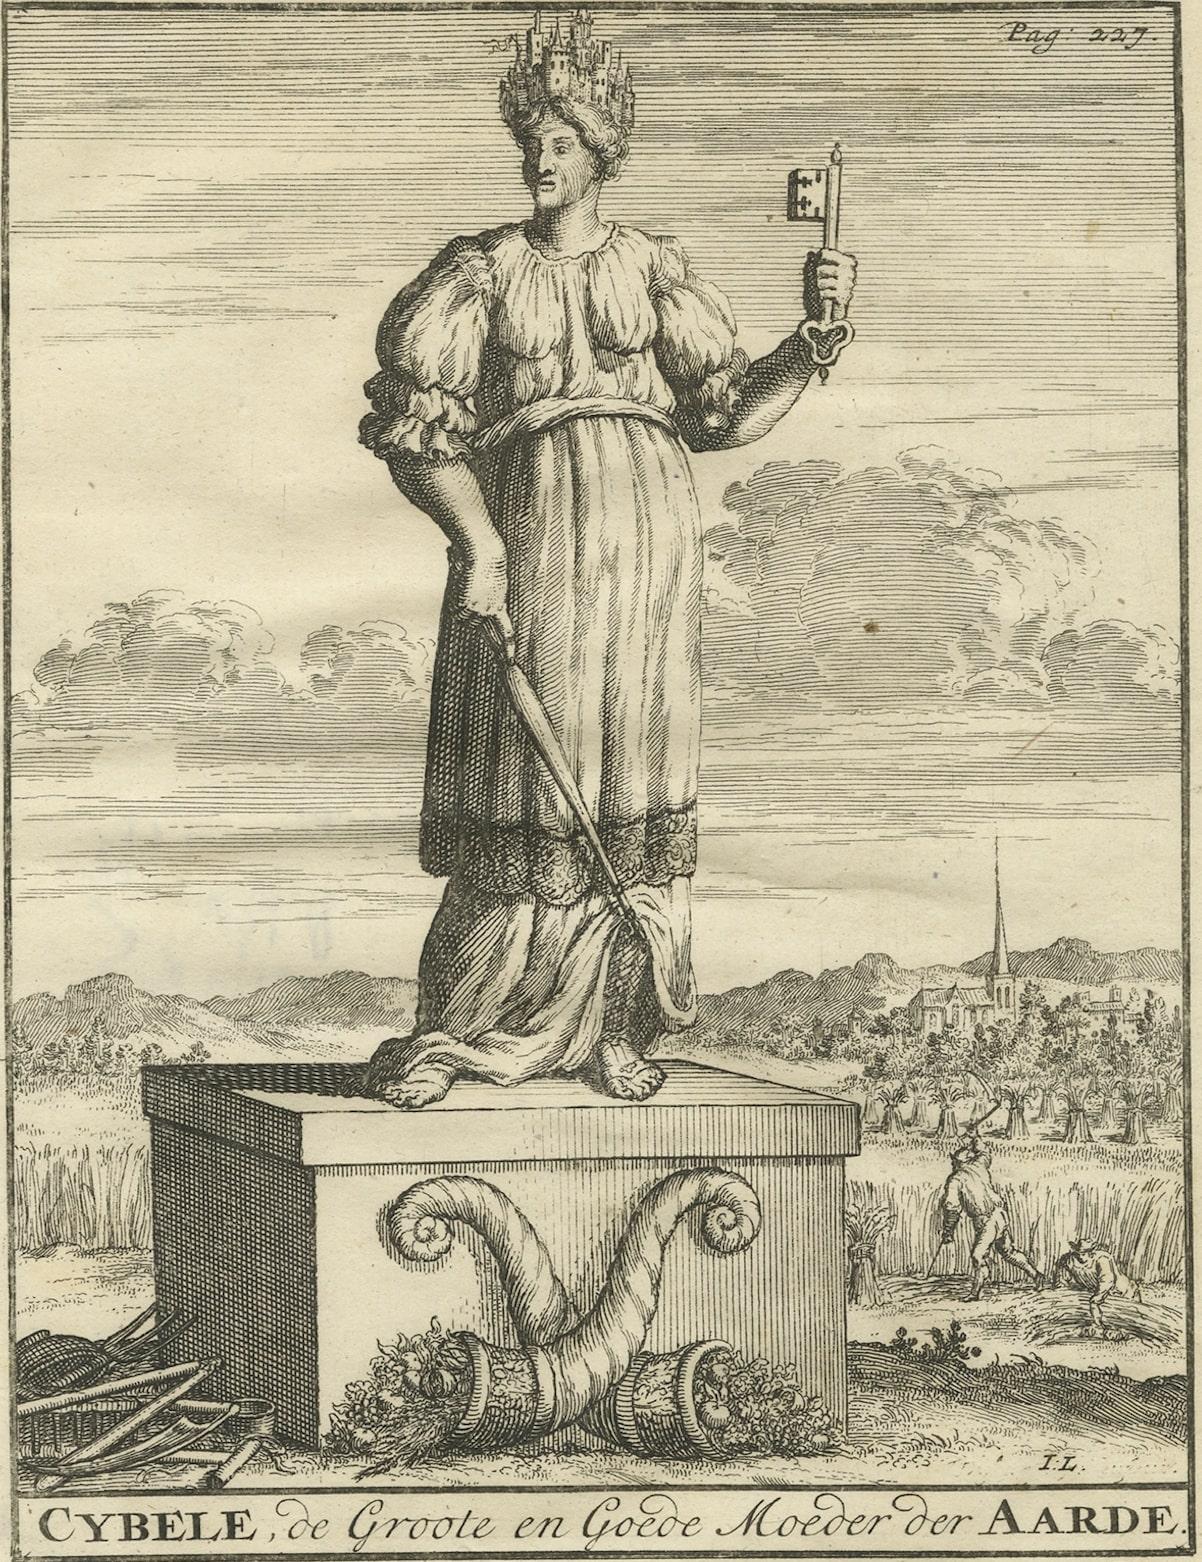 Description: Antique print, titled: 'Cybele, de Groote en Goede Moeder der Aarde' - This plate shows Cybele, the Anatolian mother goddess.

Source unknown, to be determined.

Artists and Engravers: Made by 'Jan Luyken' after an anonymous artist. Jan